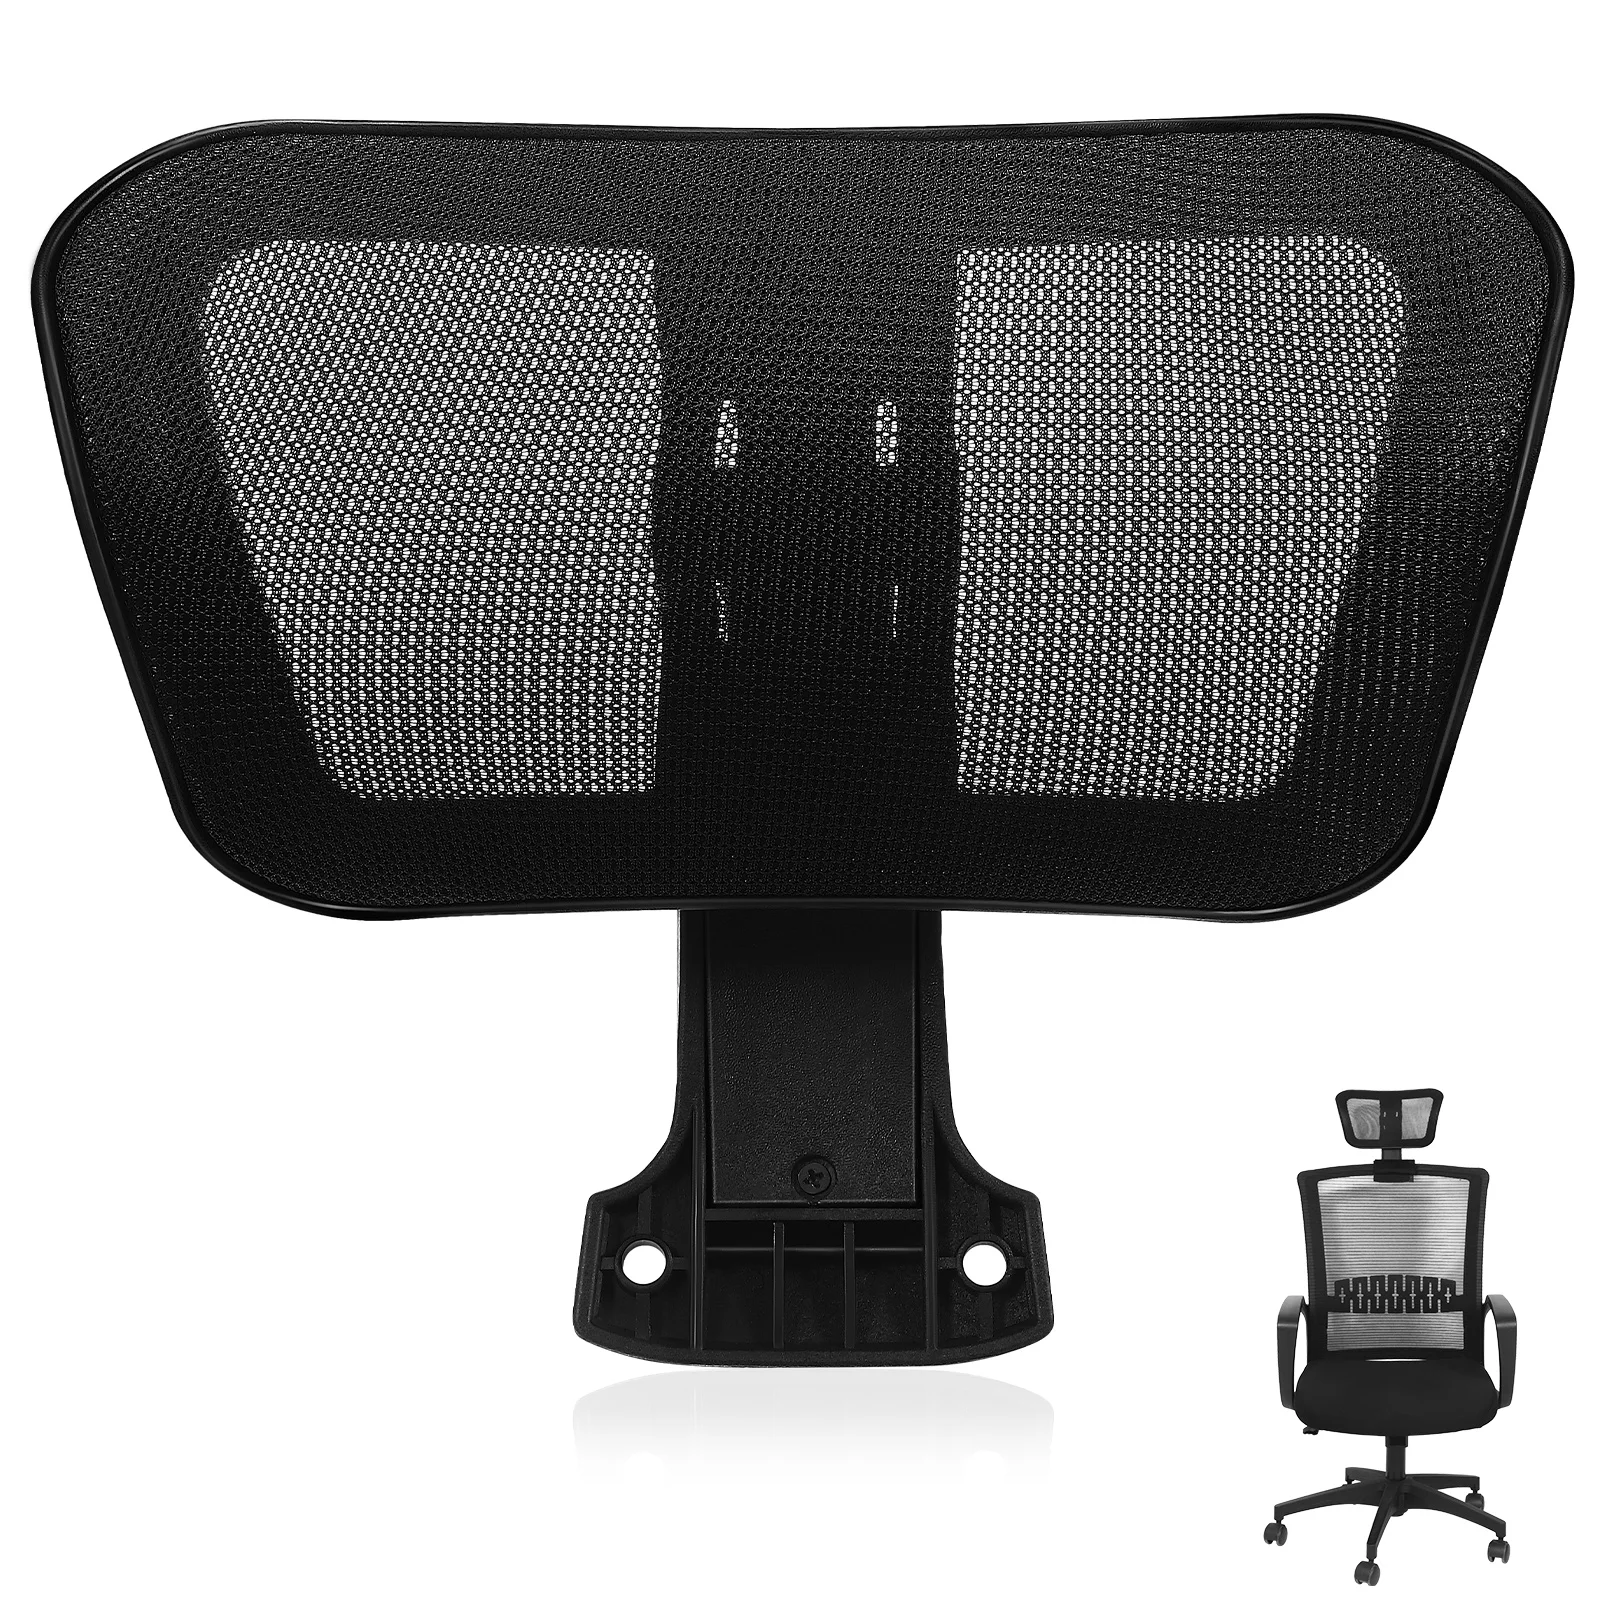 

Work Chair Headrest Neck Support for Office Supply Protection Human Body Adjustable Lift Net Pillow Height